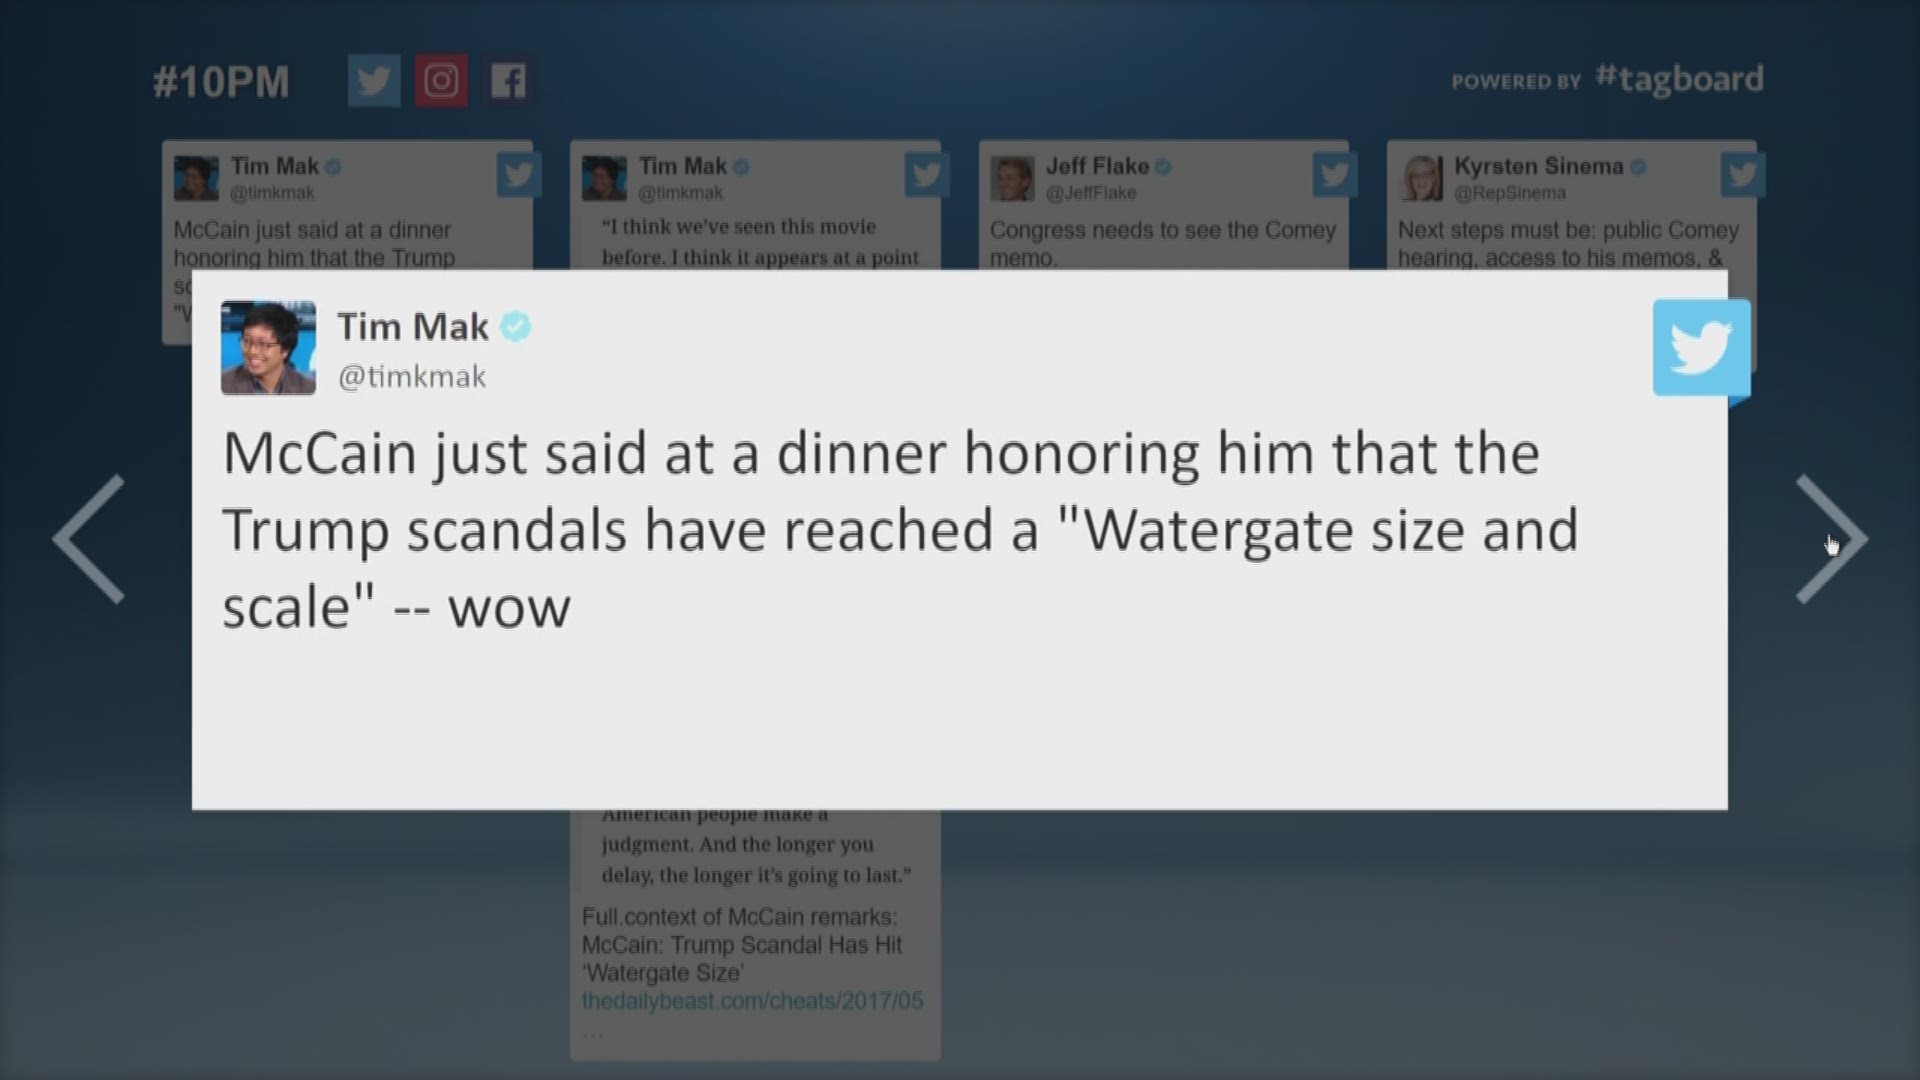 Sen. John McCain called the Comey scandal "Watergate size and scale."